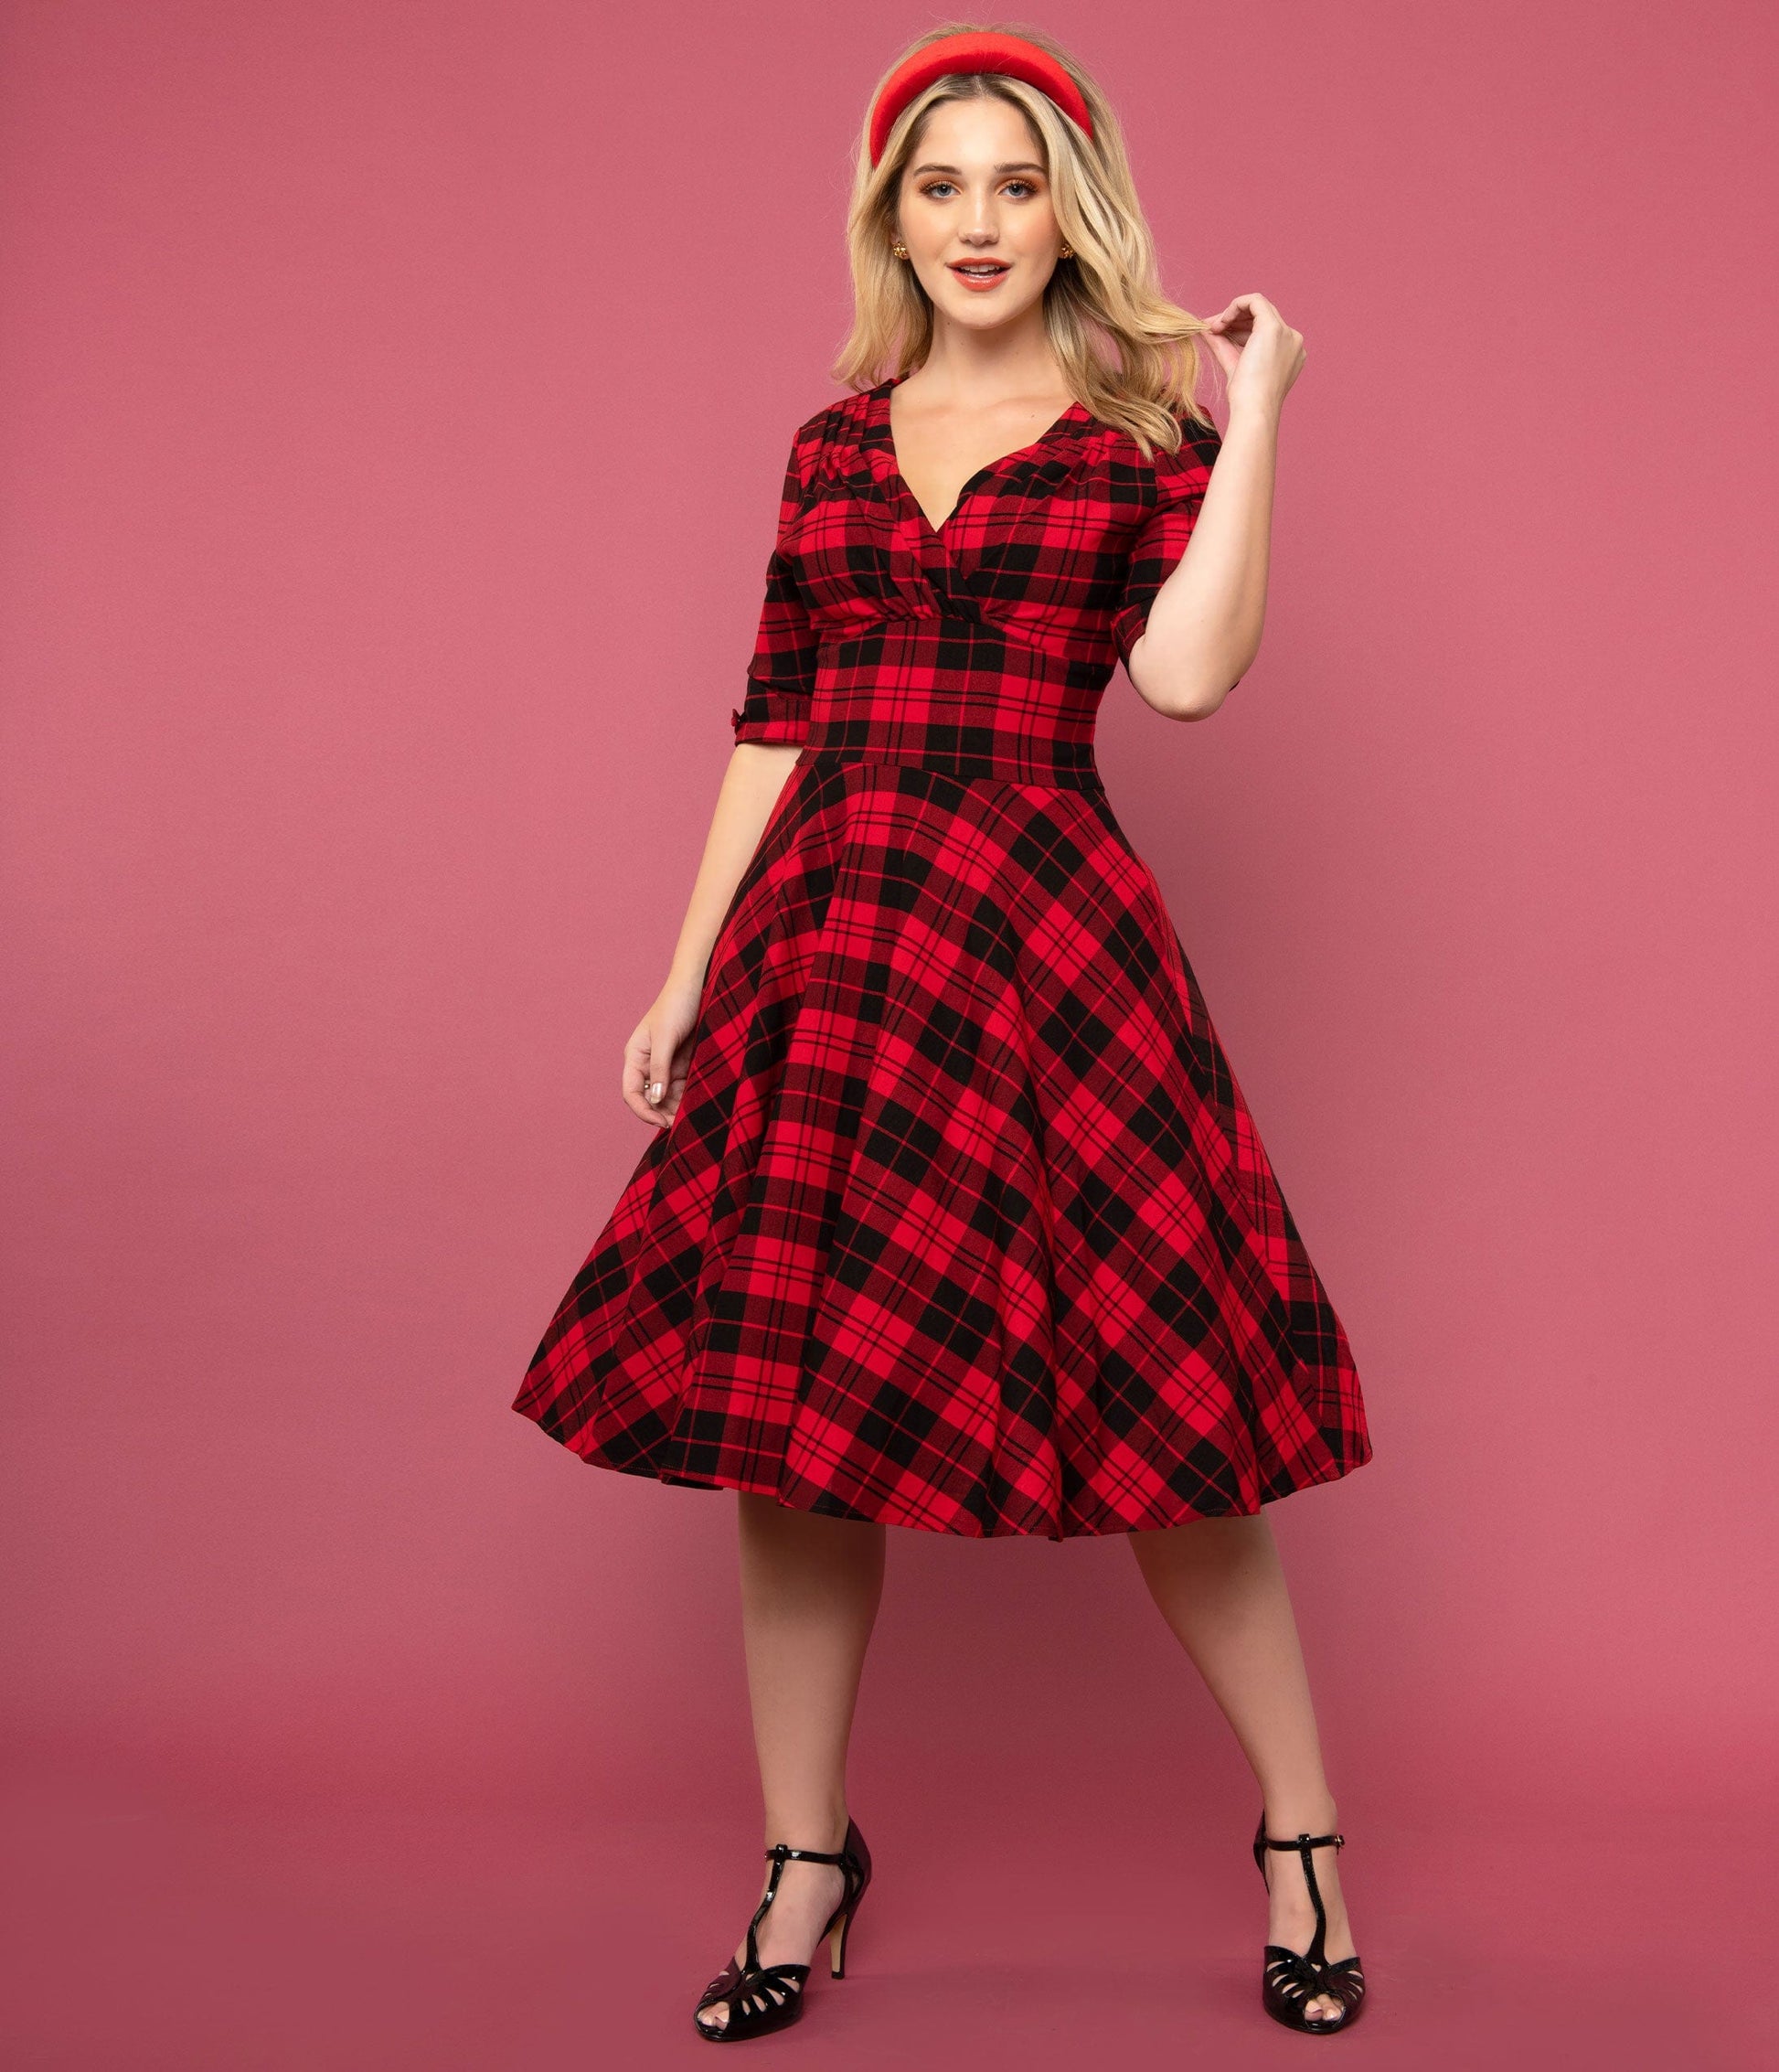 Unique Vintage 1950s Red & Black Plaid Delores Swing Dress with Sleeves